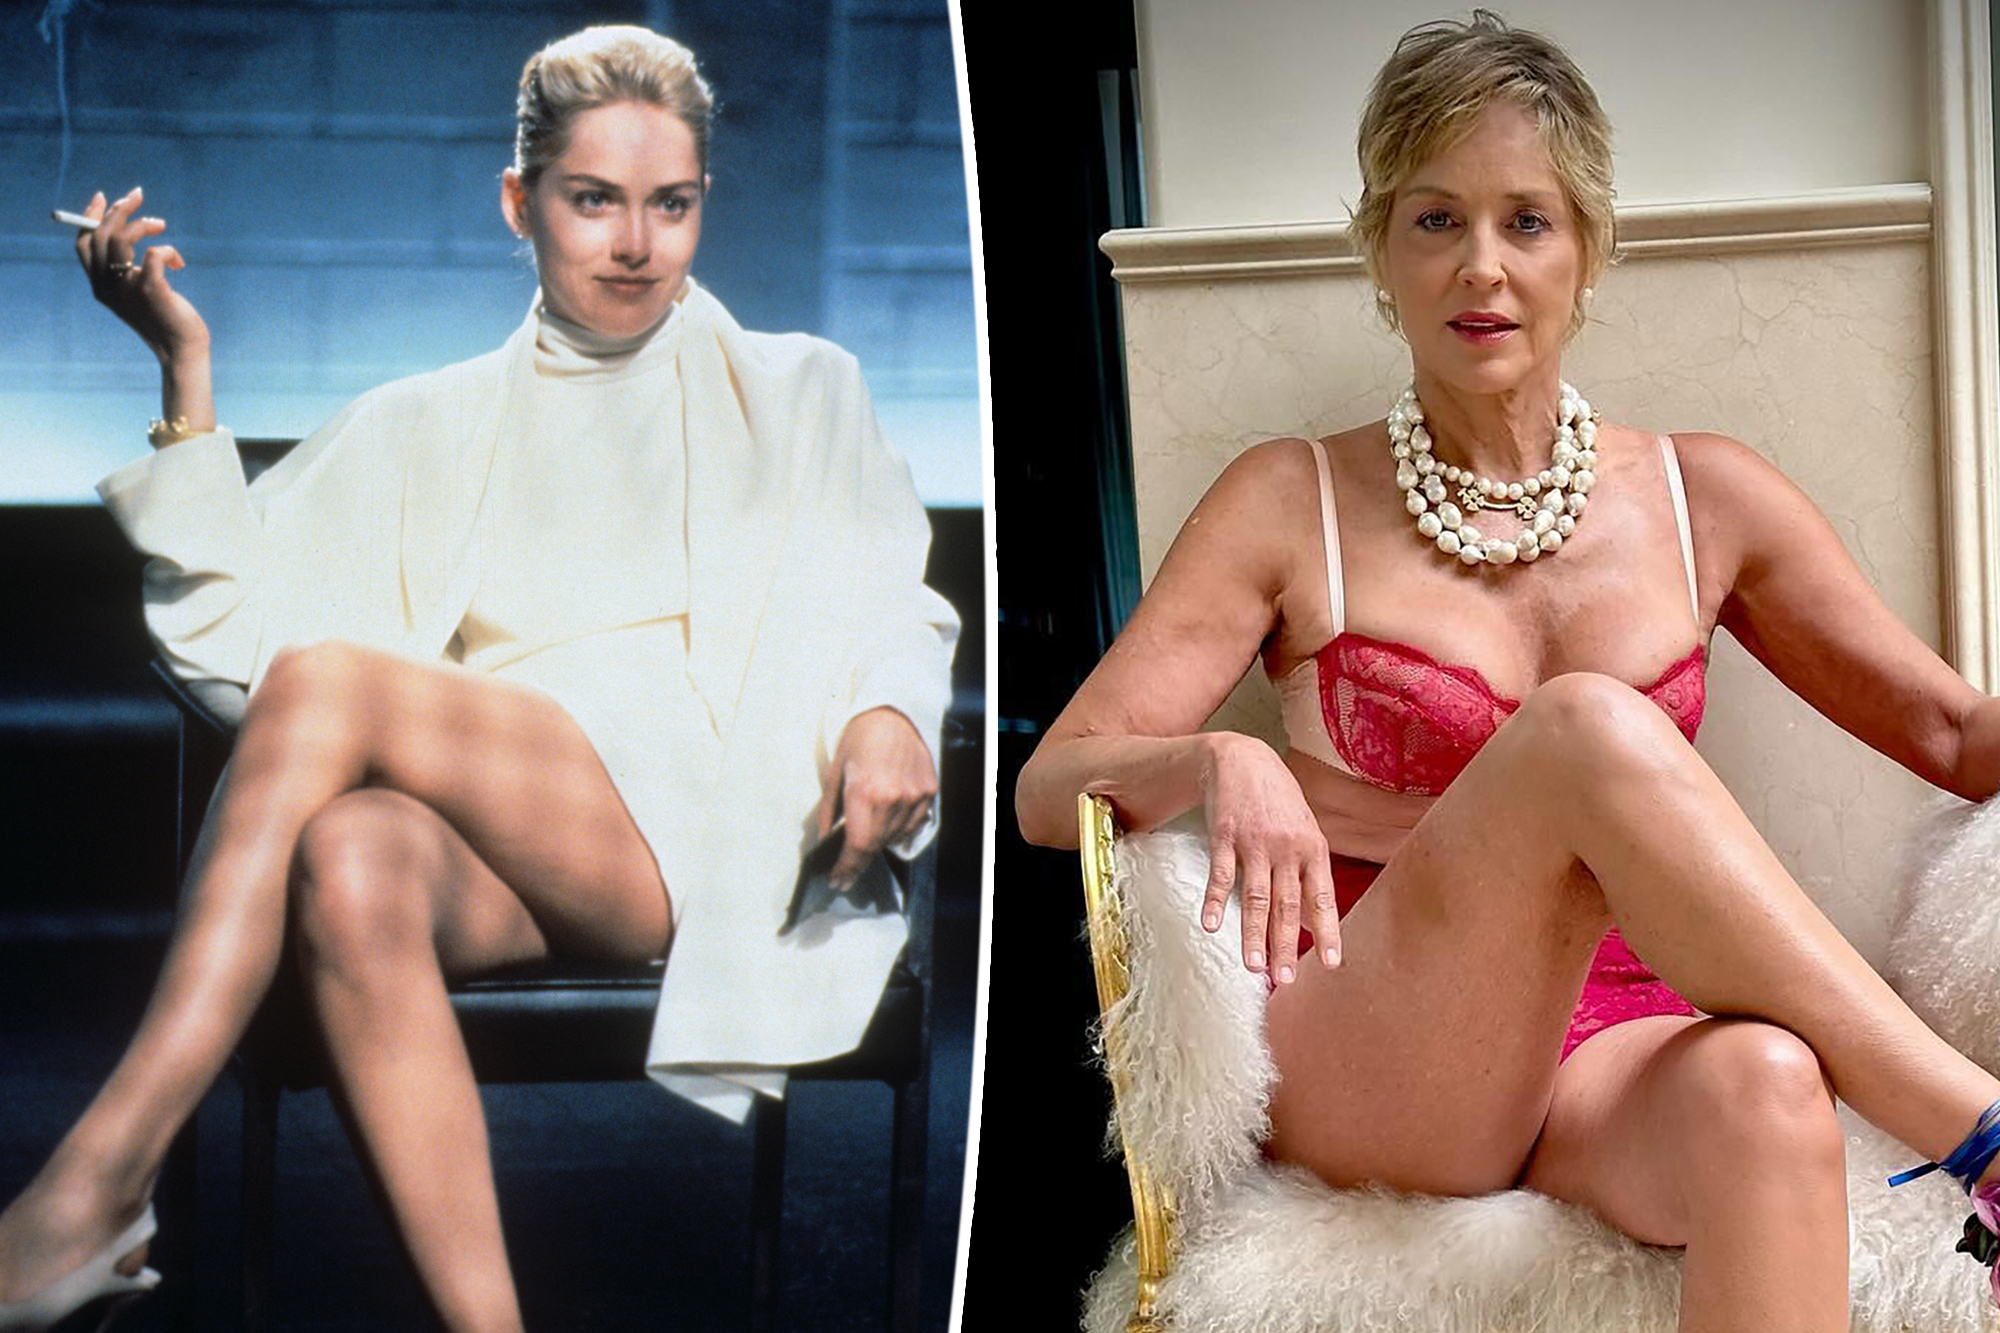 NO GOD! PLEASE NO!!! Sharon Stone Recreated the Iconic 'Basic Instinct' Scene in Red Lingerie